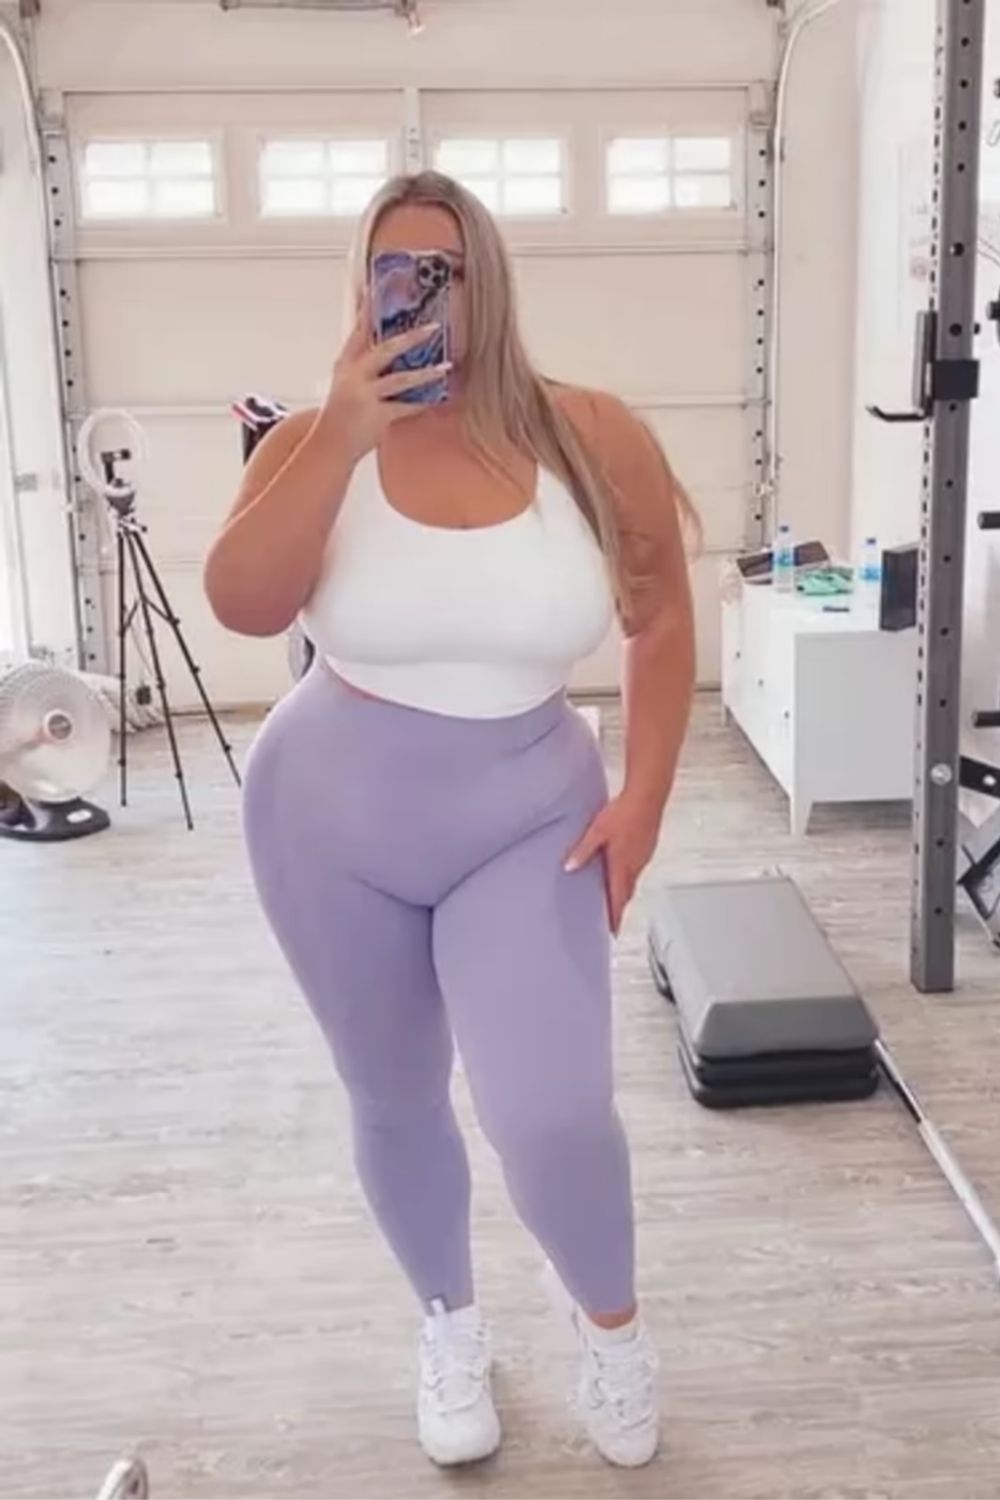 Practical and stylish with a fitted white tank top, high-waisted lilac leggings, and crisp white sneakers for a chic, sporty look suitable for any occasion.